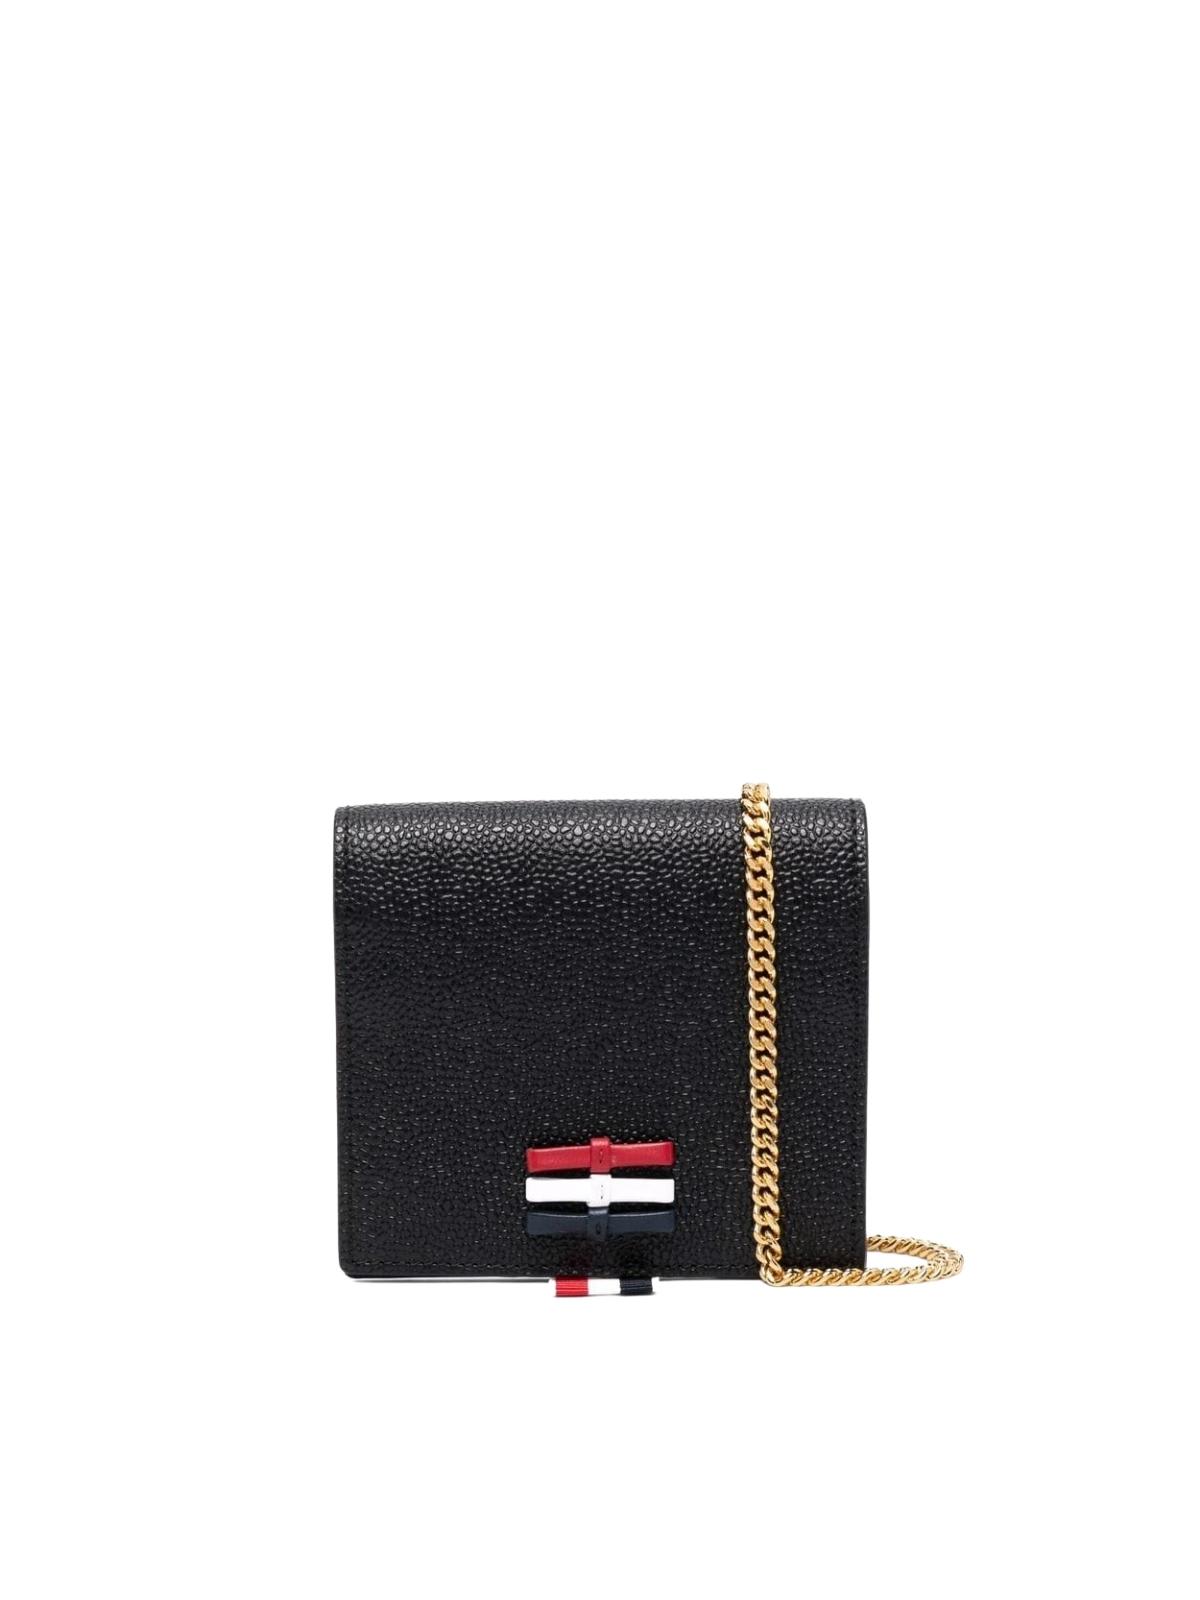 Thom Browne 3-bow Card Holder W/ Chain Strap In Pebble Grain Leather - L12, H13, W3